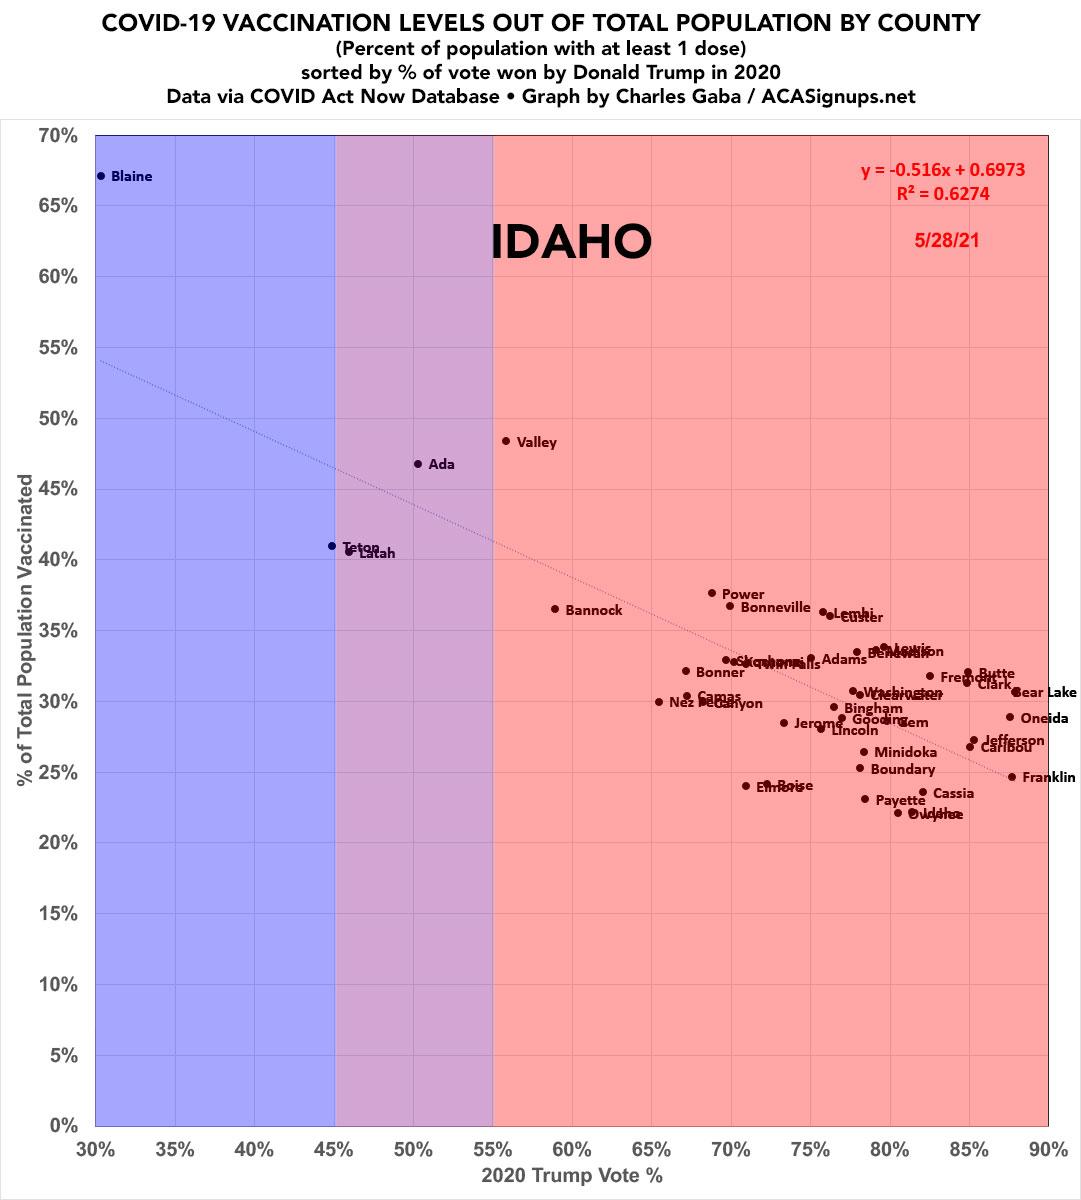 Idaho: COVID-19 Vaccinations by County/Partisan Lean (dot view)